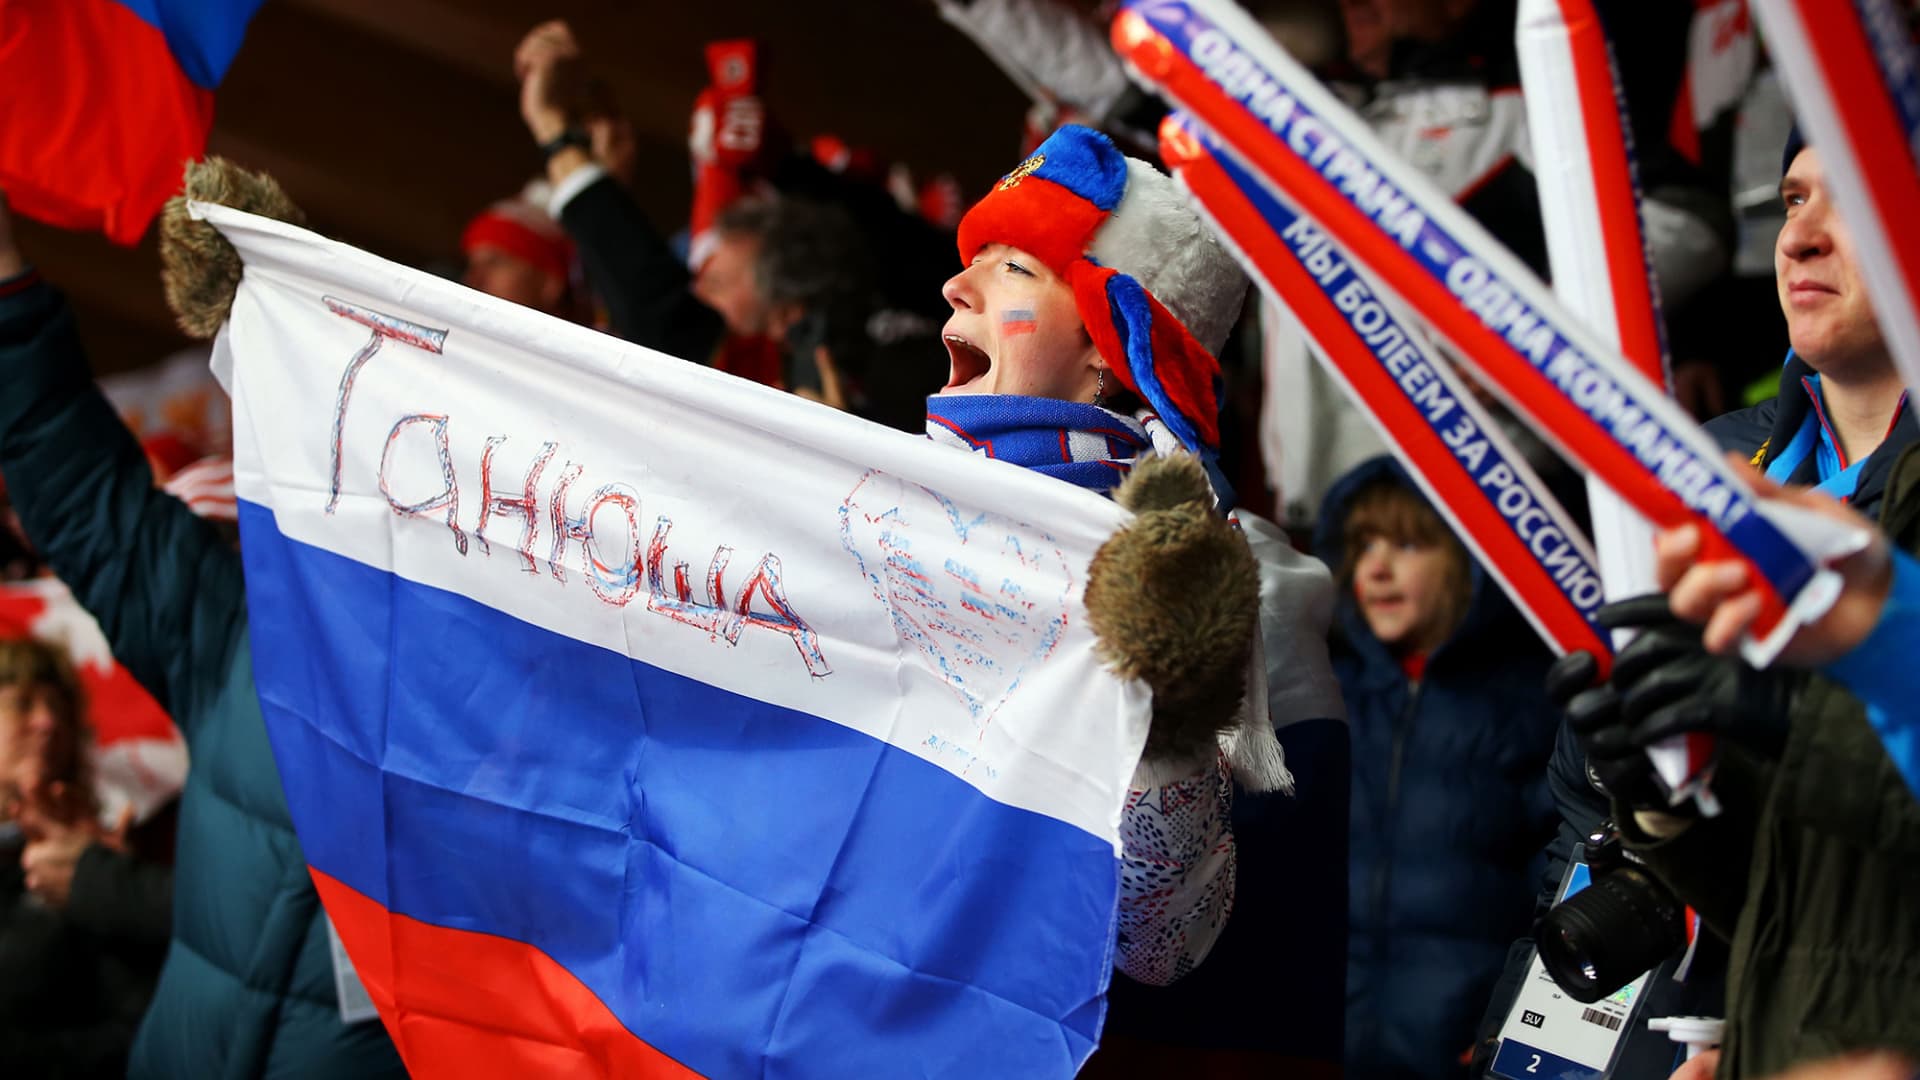 A fan holds up a Russian flag during the luge relay event at the 2014 Winter Olympic Games in Sochi, Russia.